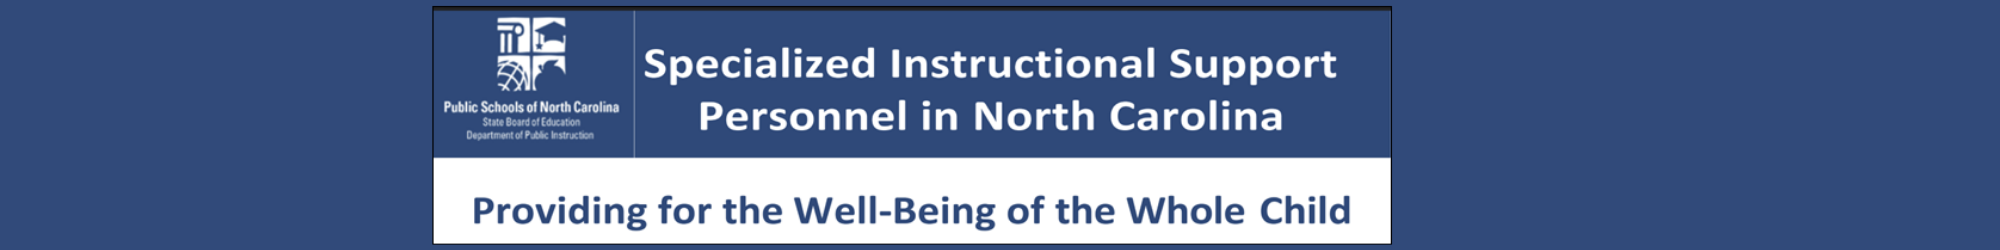 Specialized Instructional Support Personnel in North Carolina